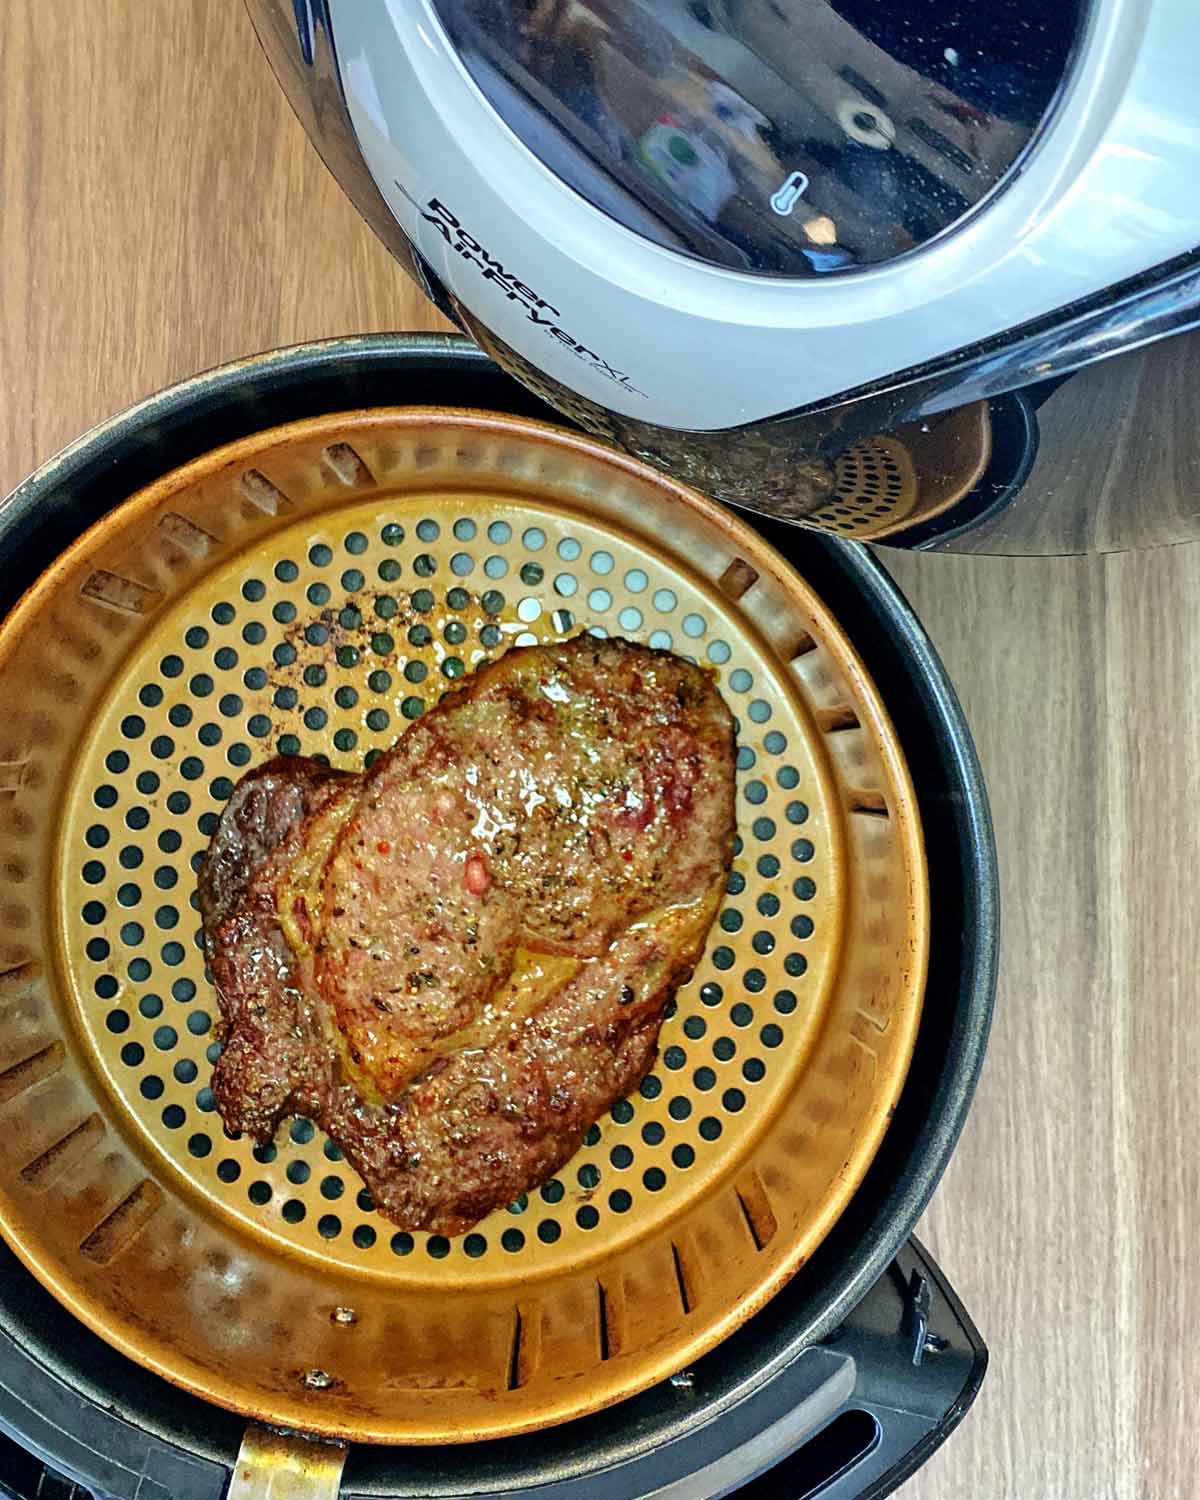 An air fryer basket with a cooked steak in it.